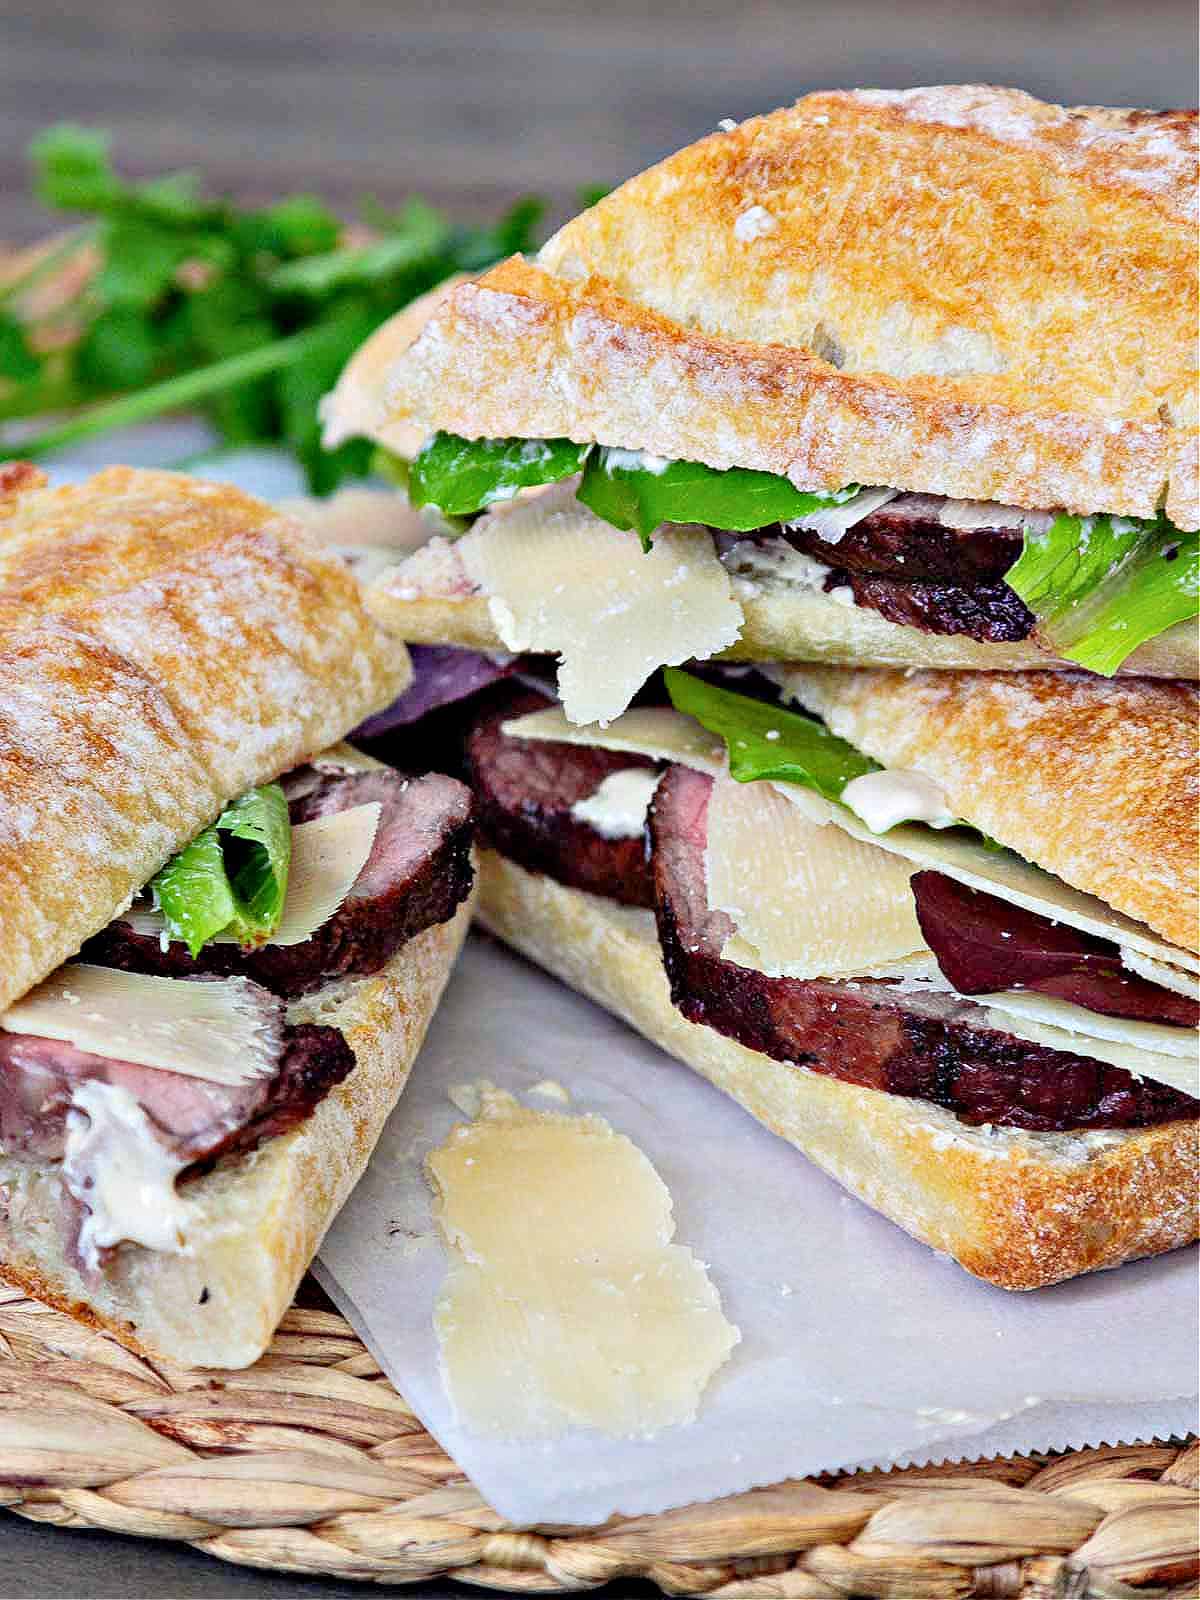 Shaved parmesan on roast beef sandwiches on baguettes.